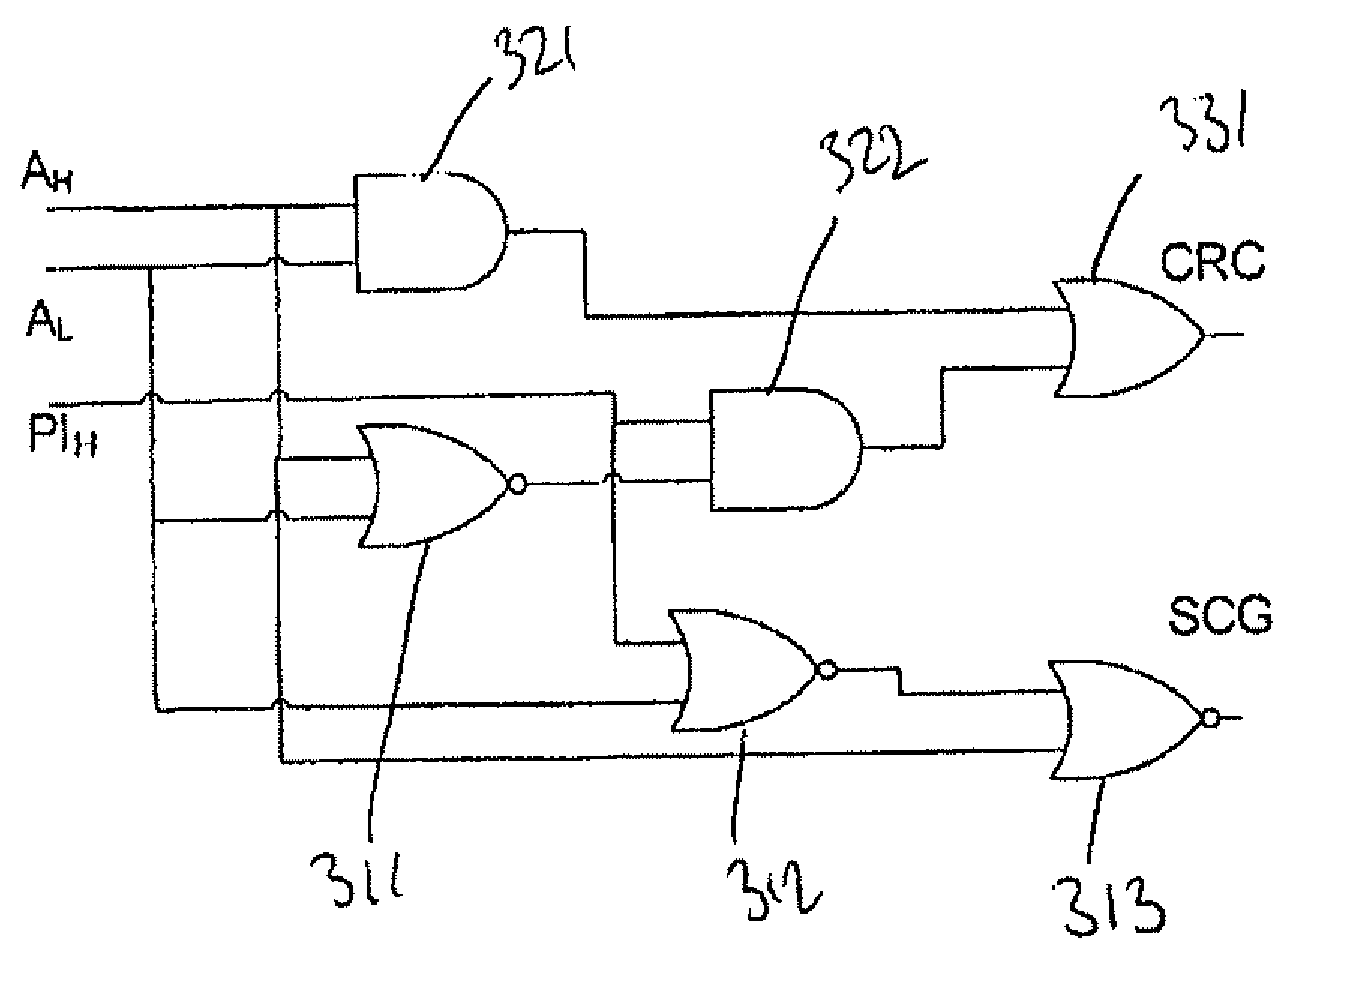 All optical processing circuit for conflict resolution and switch configuration in a 2x2 optical node